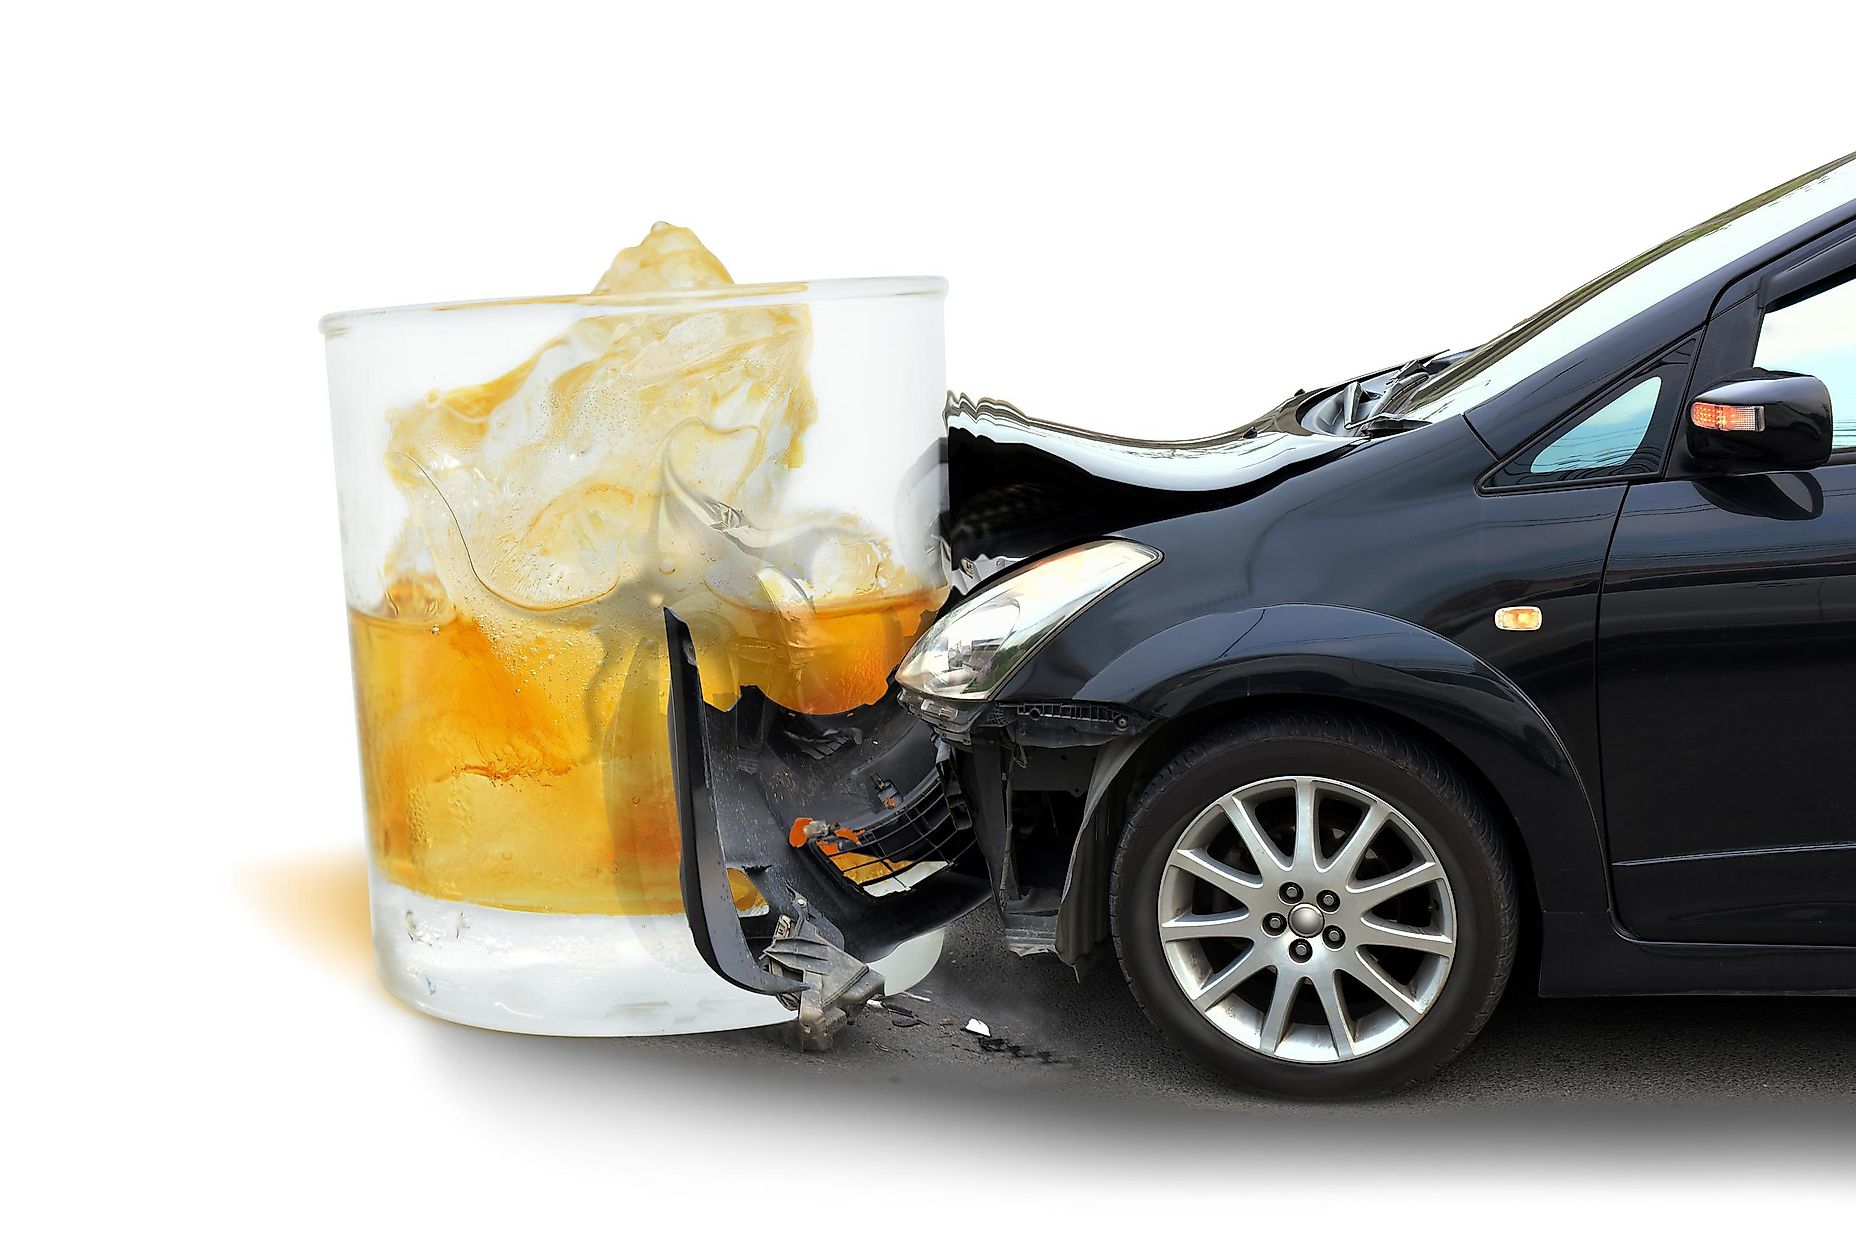 how many drunk drivers killed in 2015